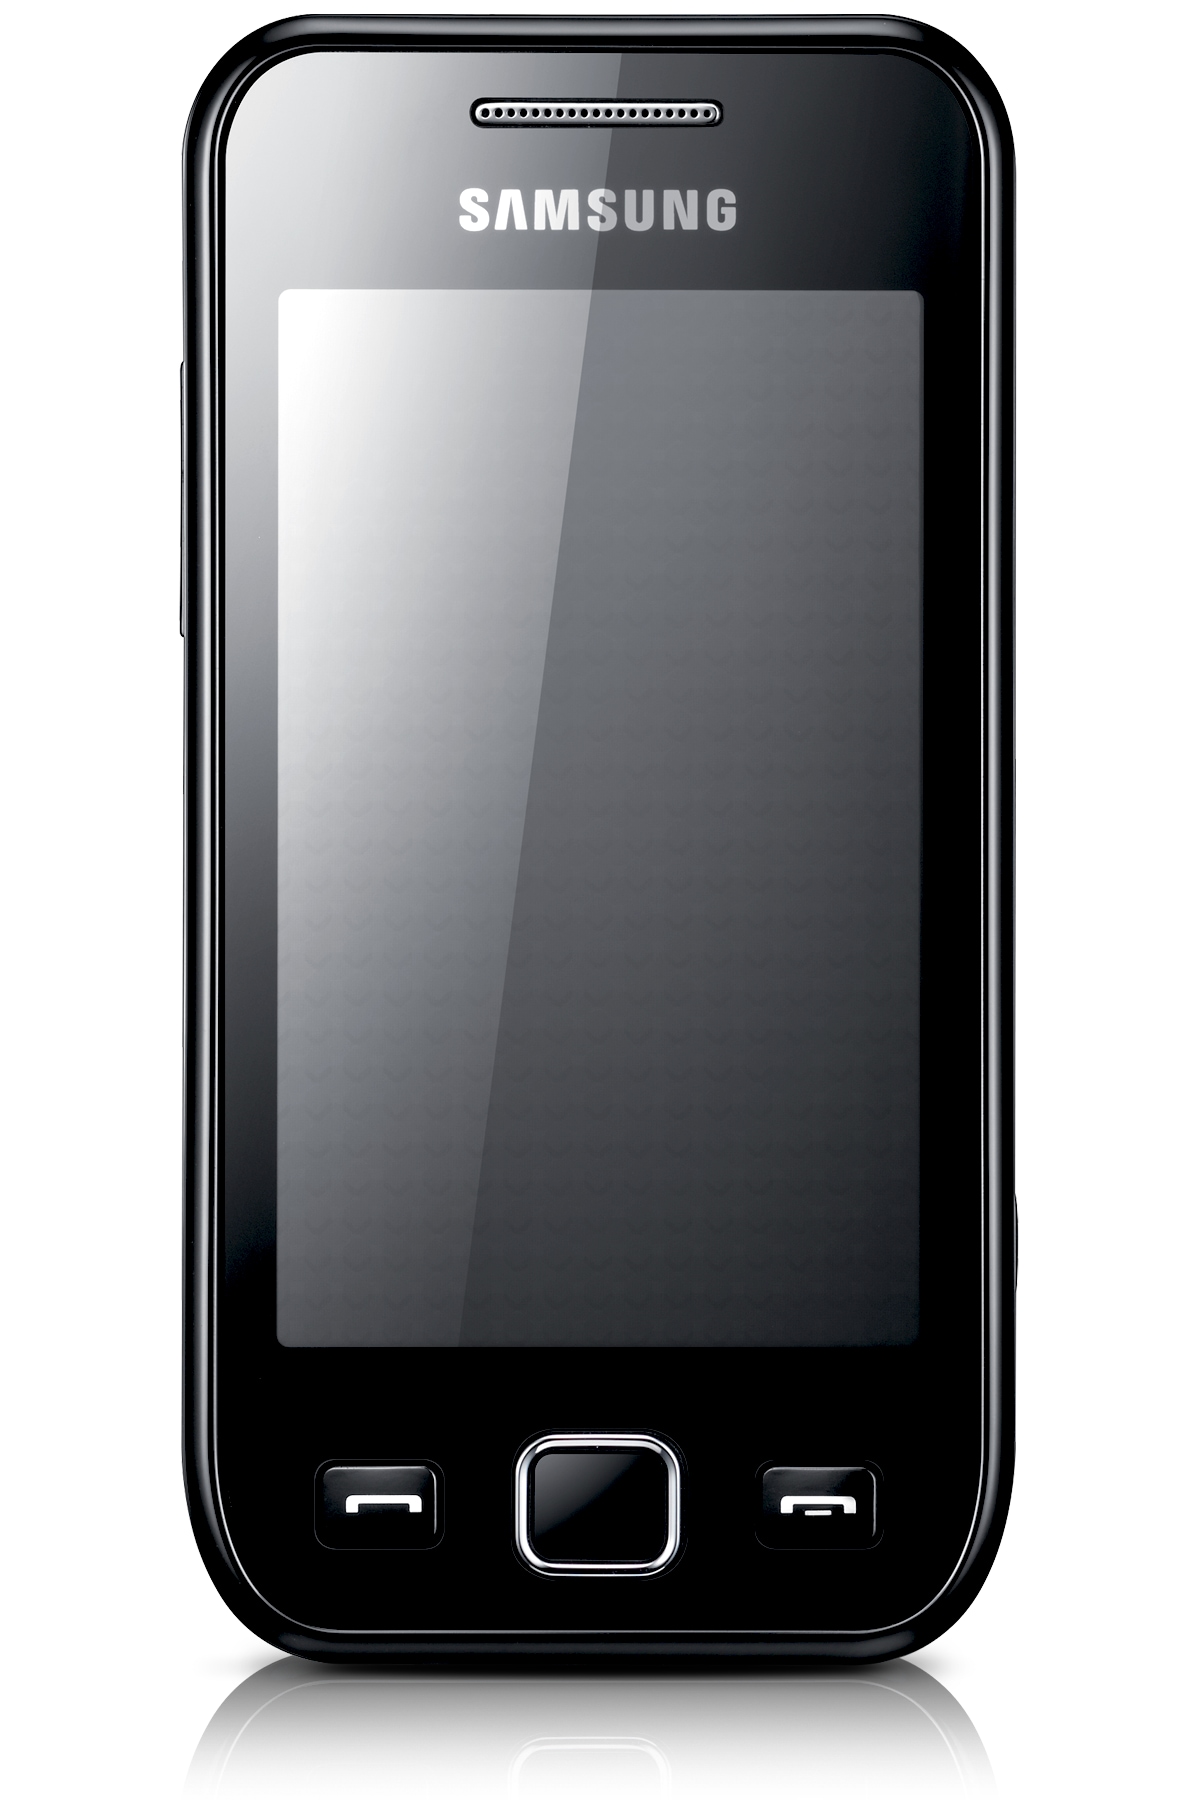 http://images.samsung.com/is/image/samsung/ru_GT-S5250PWFSER_001_Front?$M-Thumbnail$